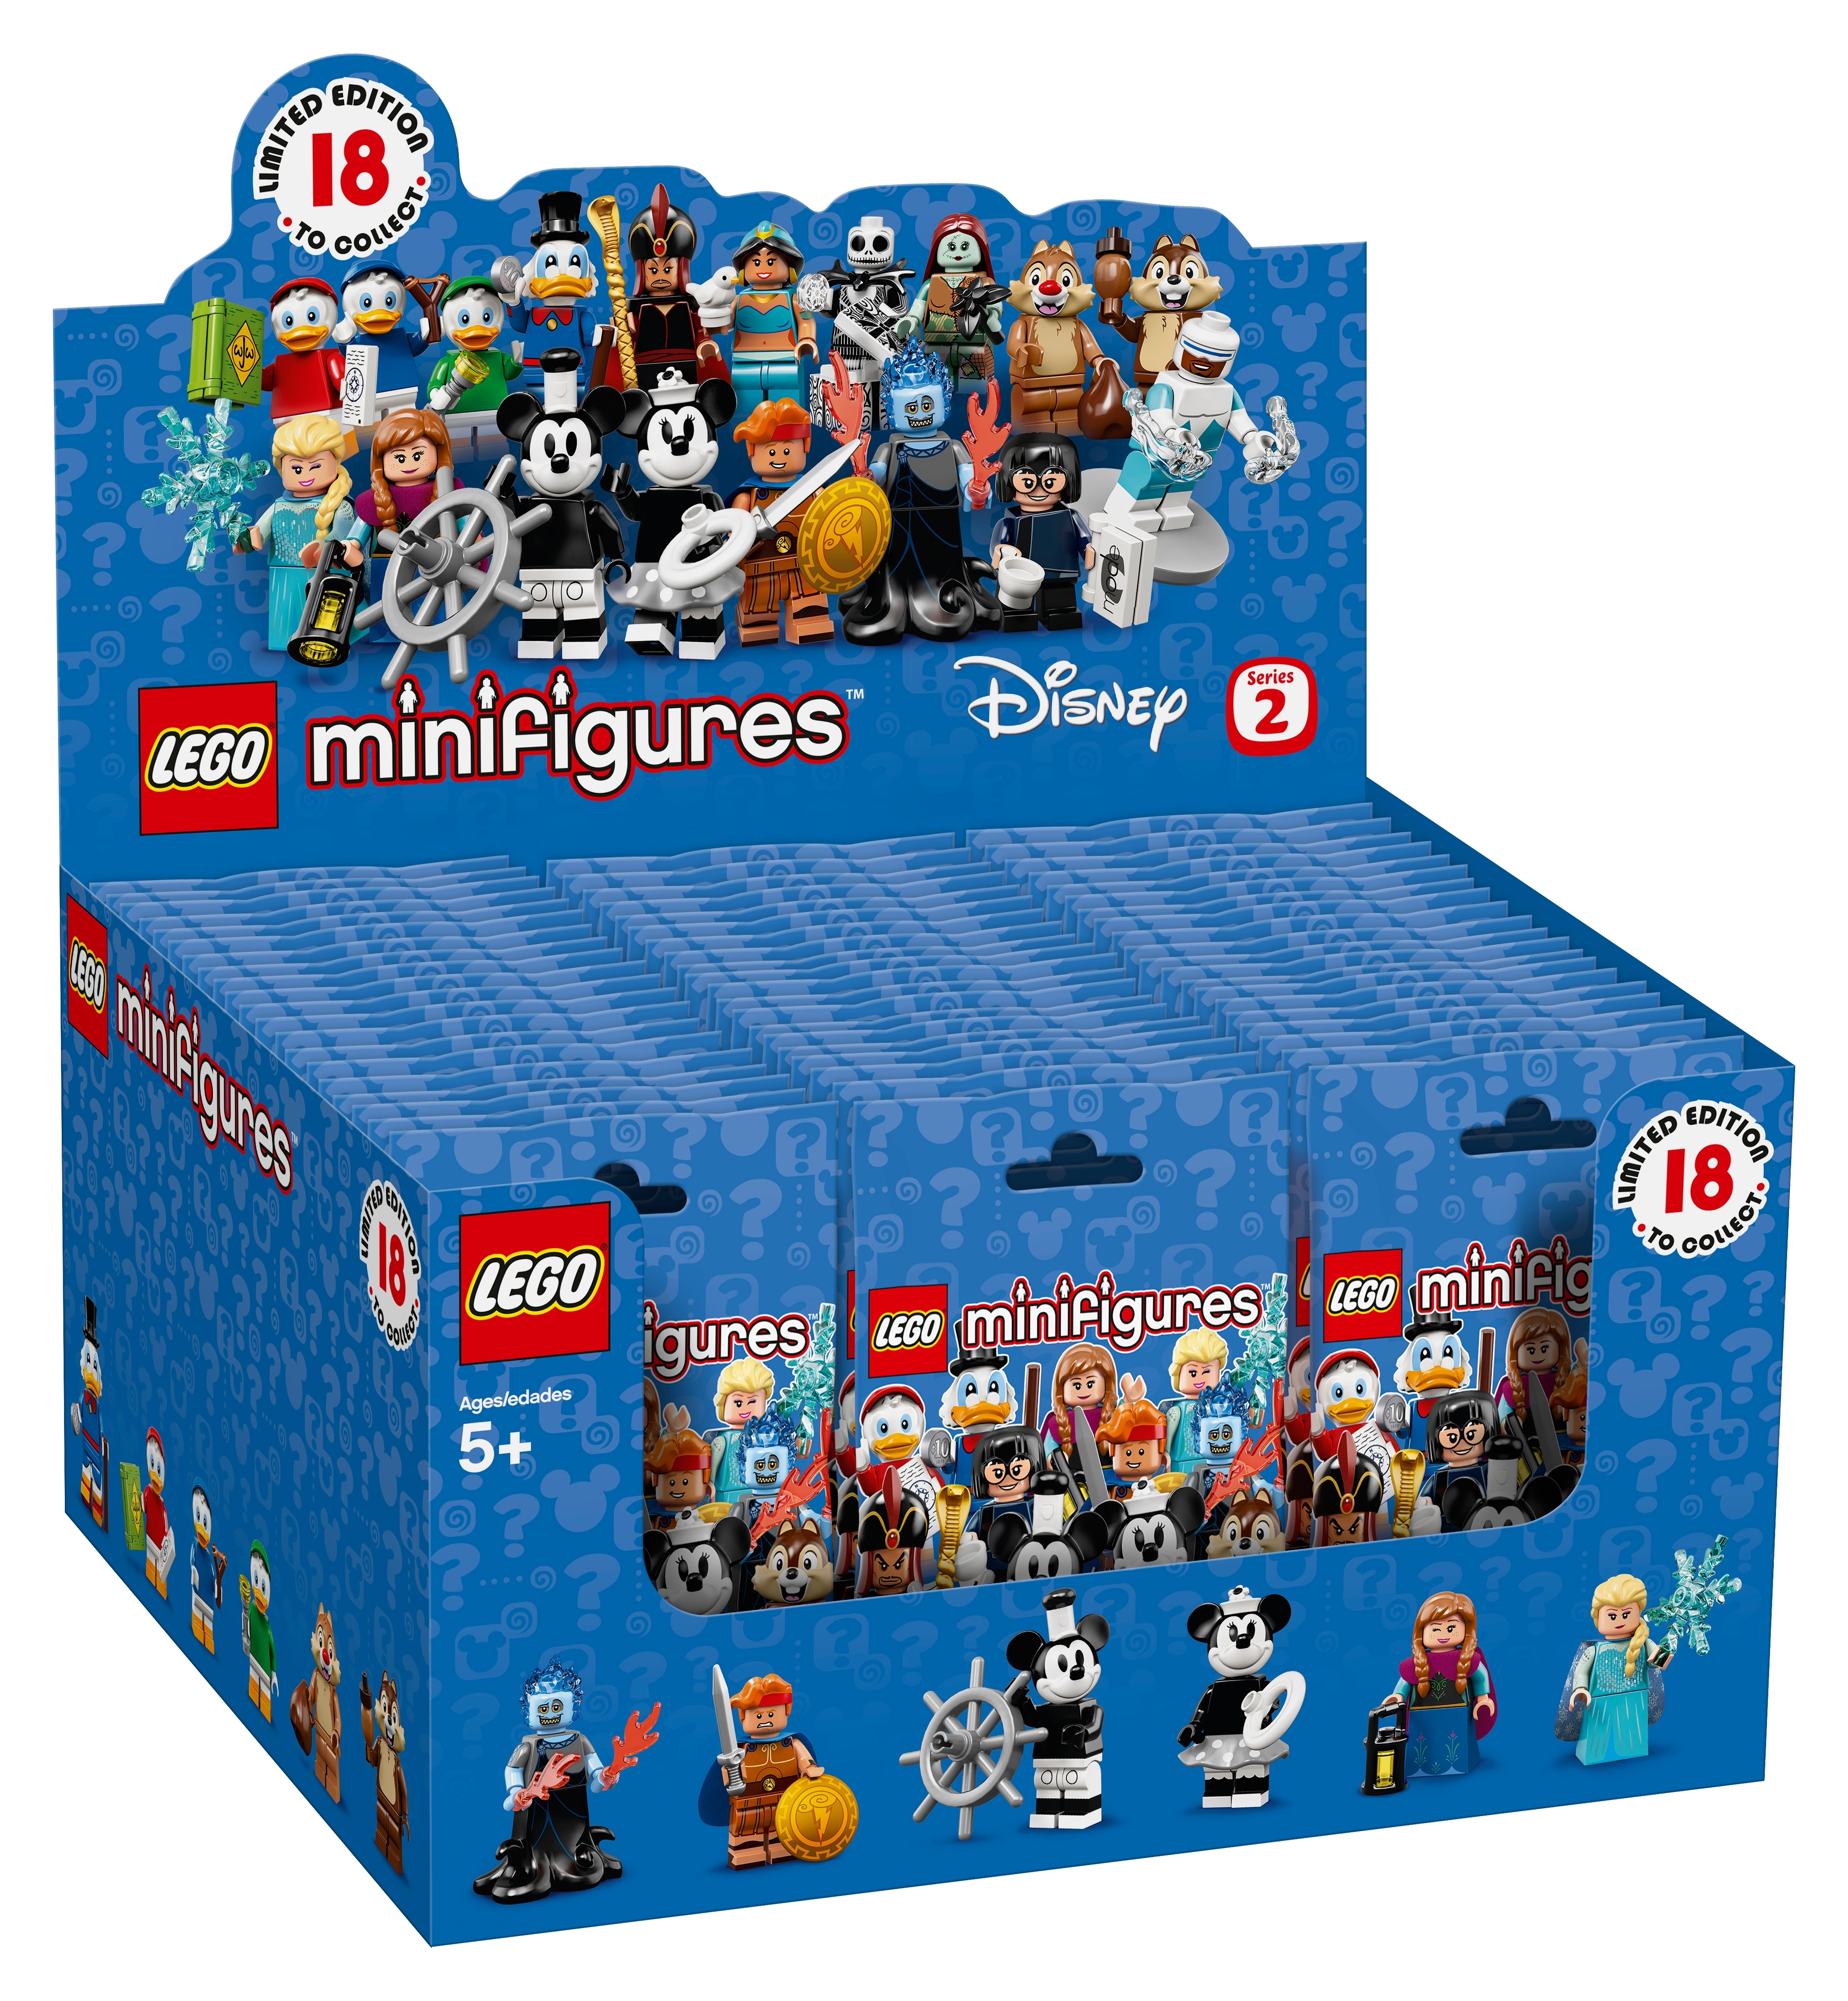 LEGO 71024 Disney Series 2 Minifigures Complete Set of 18 Free Shipping! 